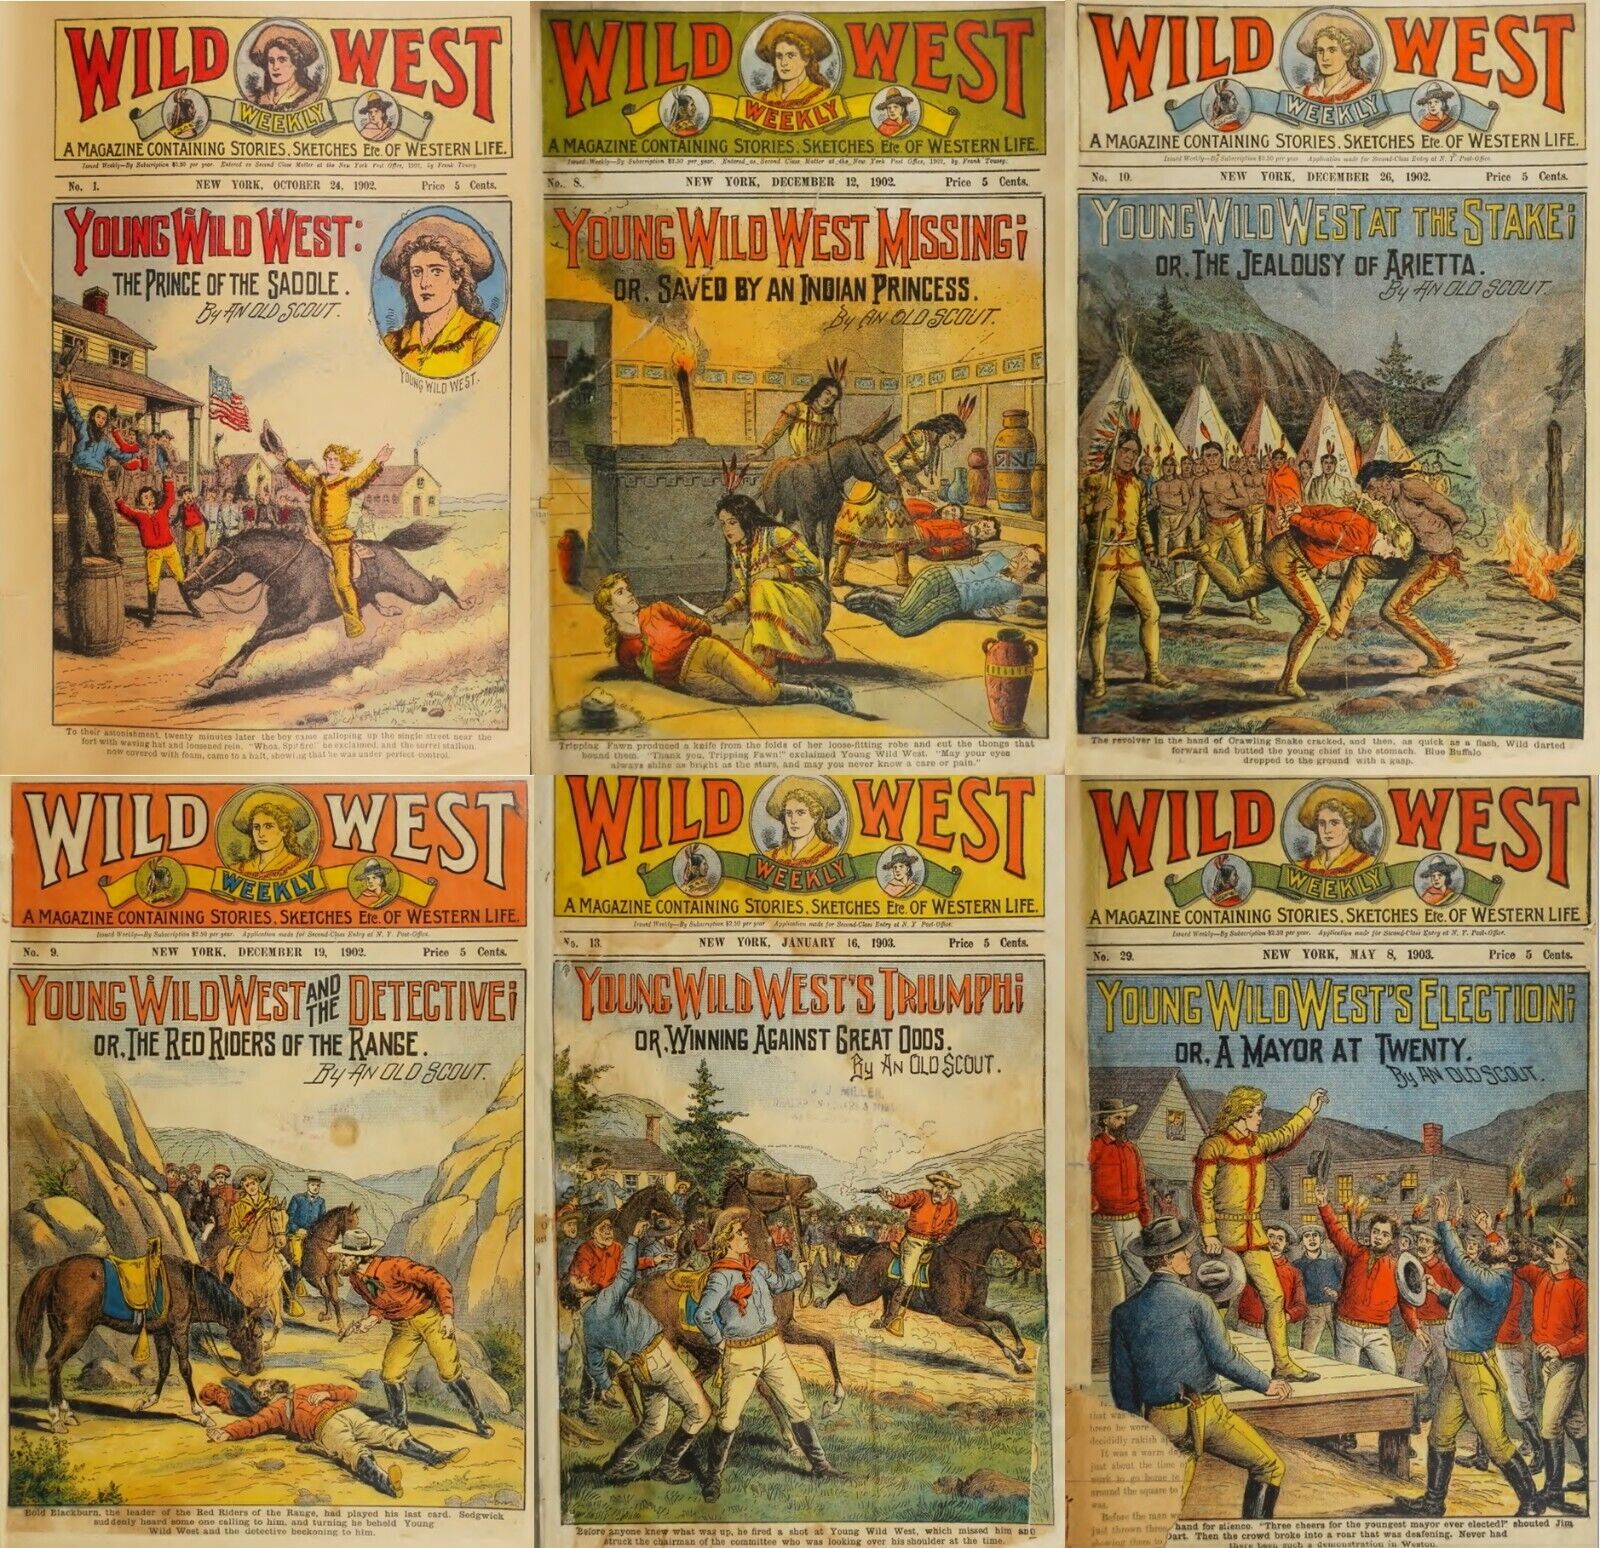 93 Old Rare Issues of Wild West Weekly American Heroine Frontier Magazine on DVD